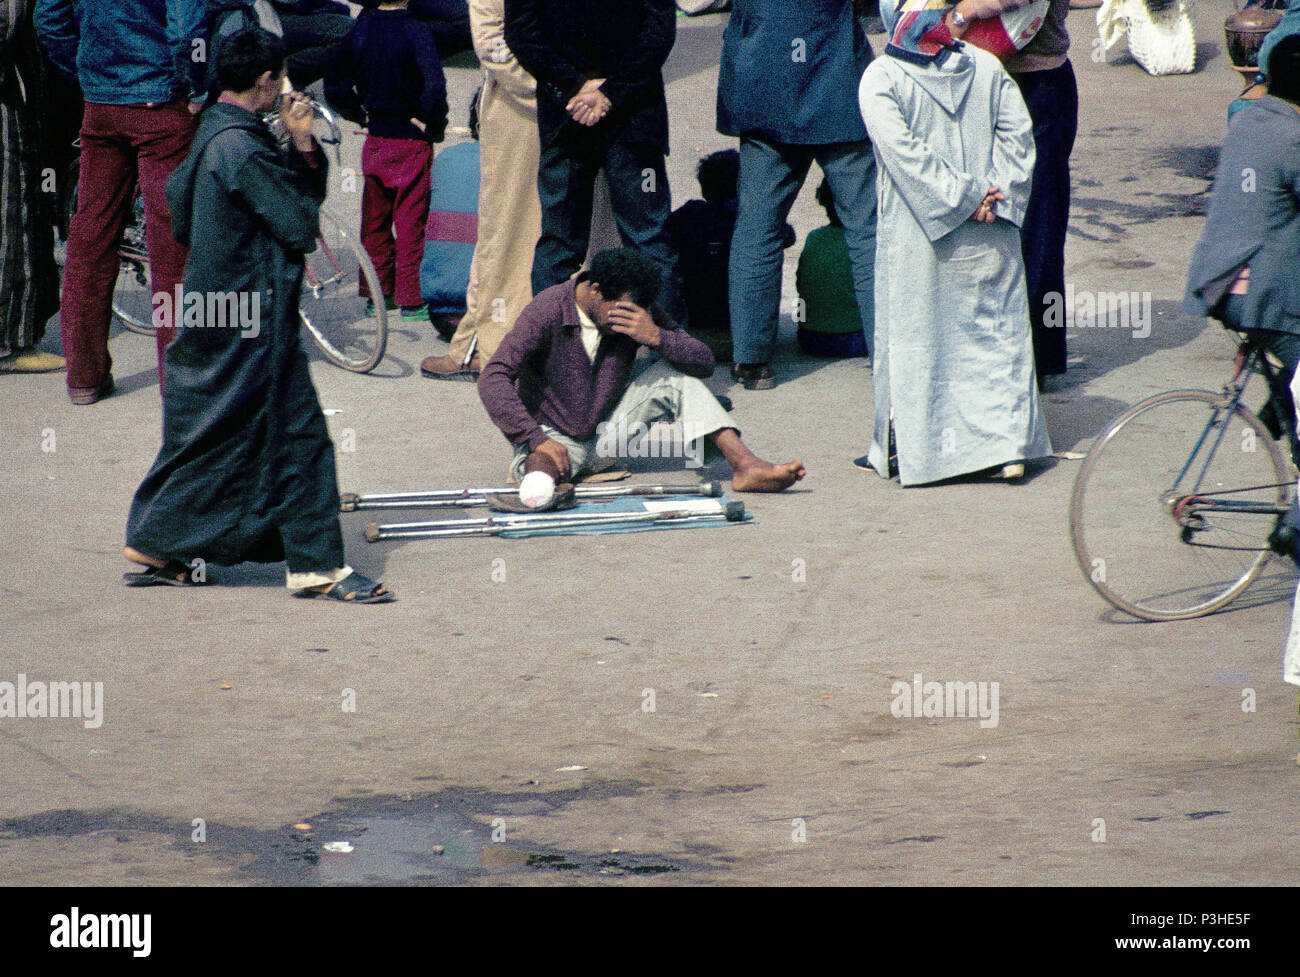 Leg amputee young beggar in the central market square Djemaa el Fna in Marrakech, unnoticed by the bystanders, analogue undated image of March 1985. Photo: Matthias Toedt/dpa-Zentralbild/ZB/Picture Alliance | usage worldwide Stock Photo